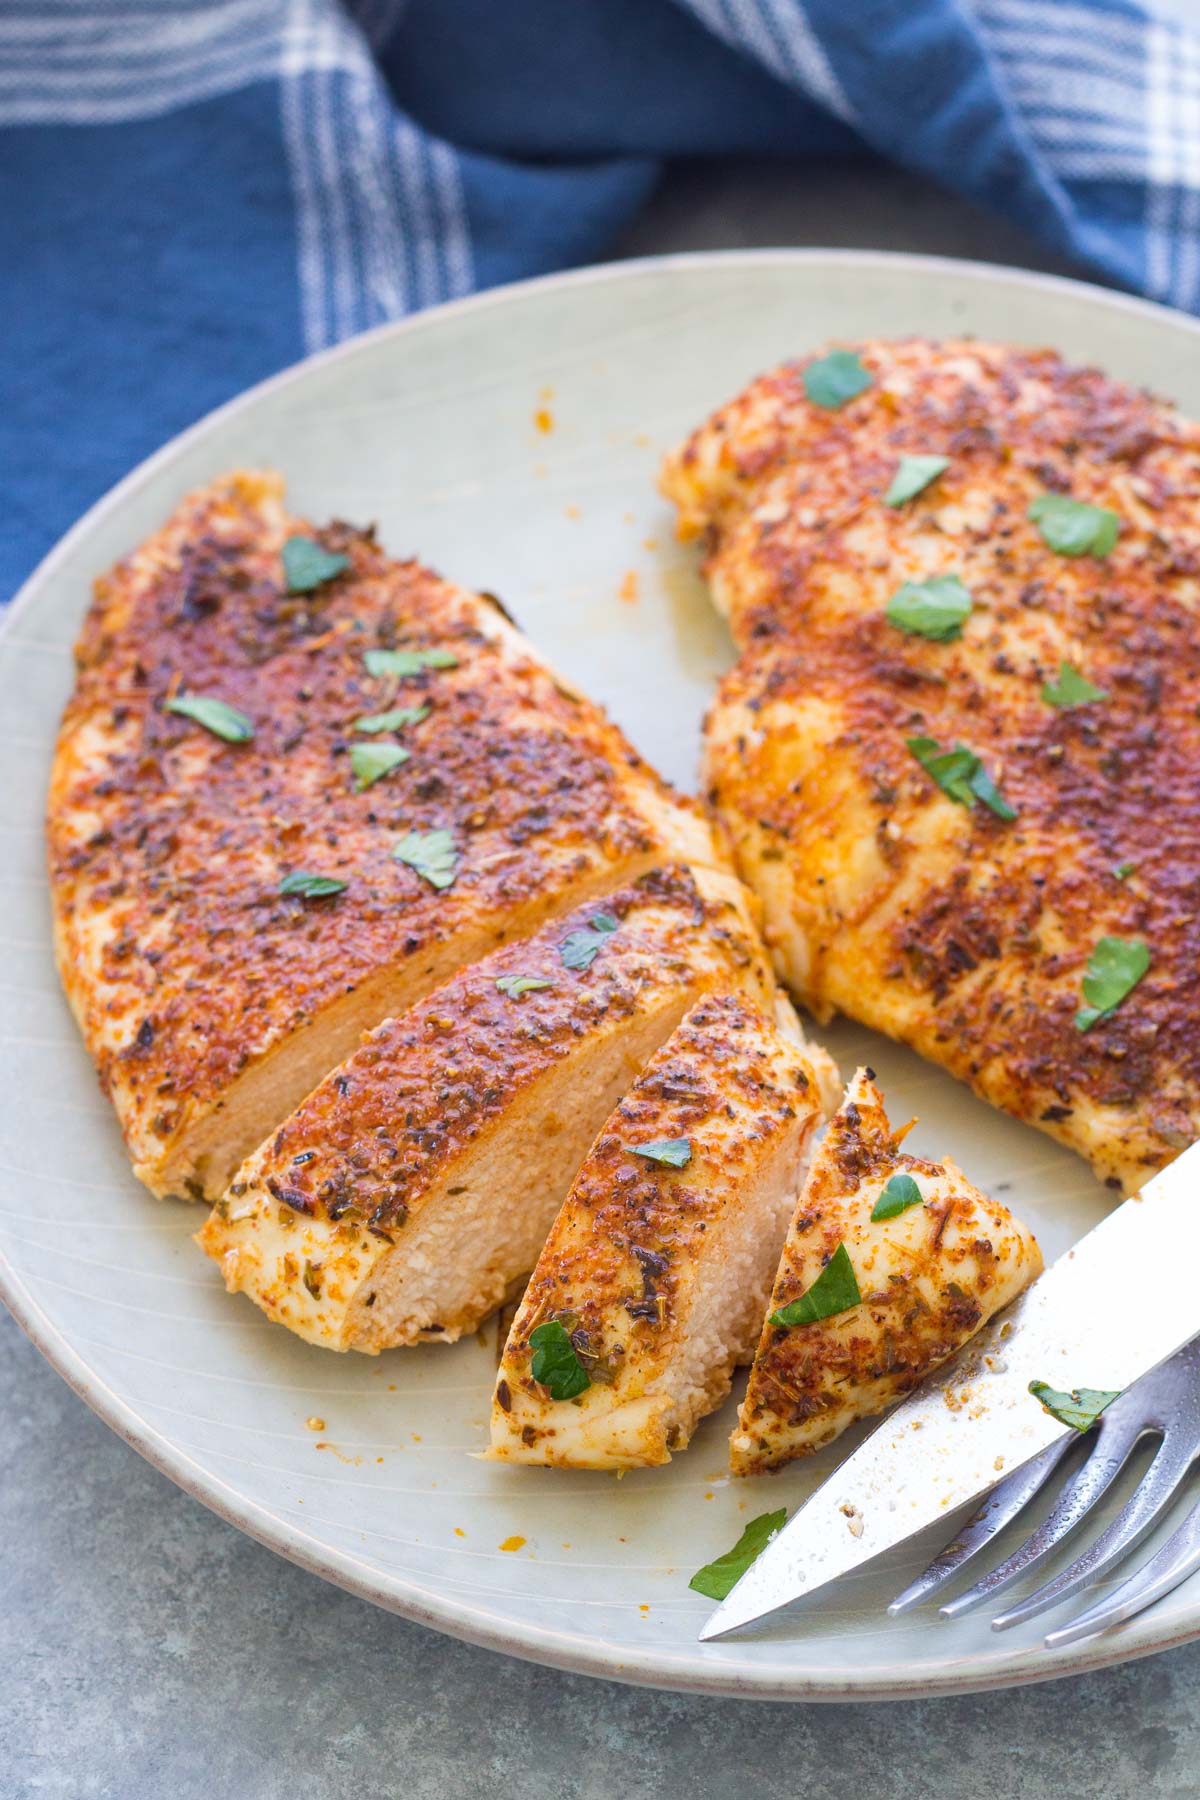 Baked Chicken Breast Recipe Juicy Flavorful,How Long To Grill Thick Pork Chops